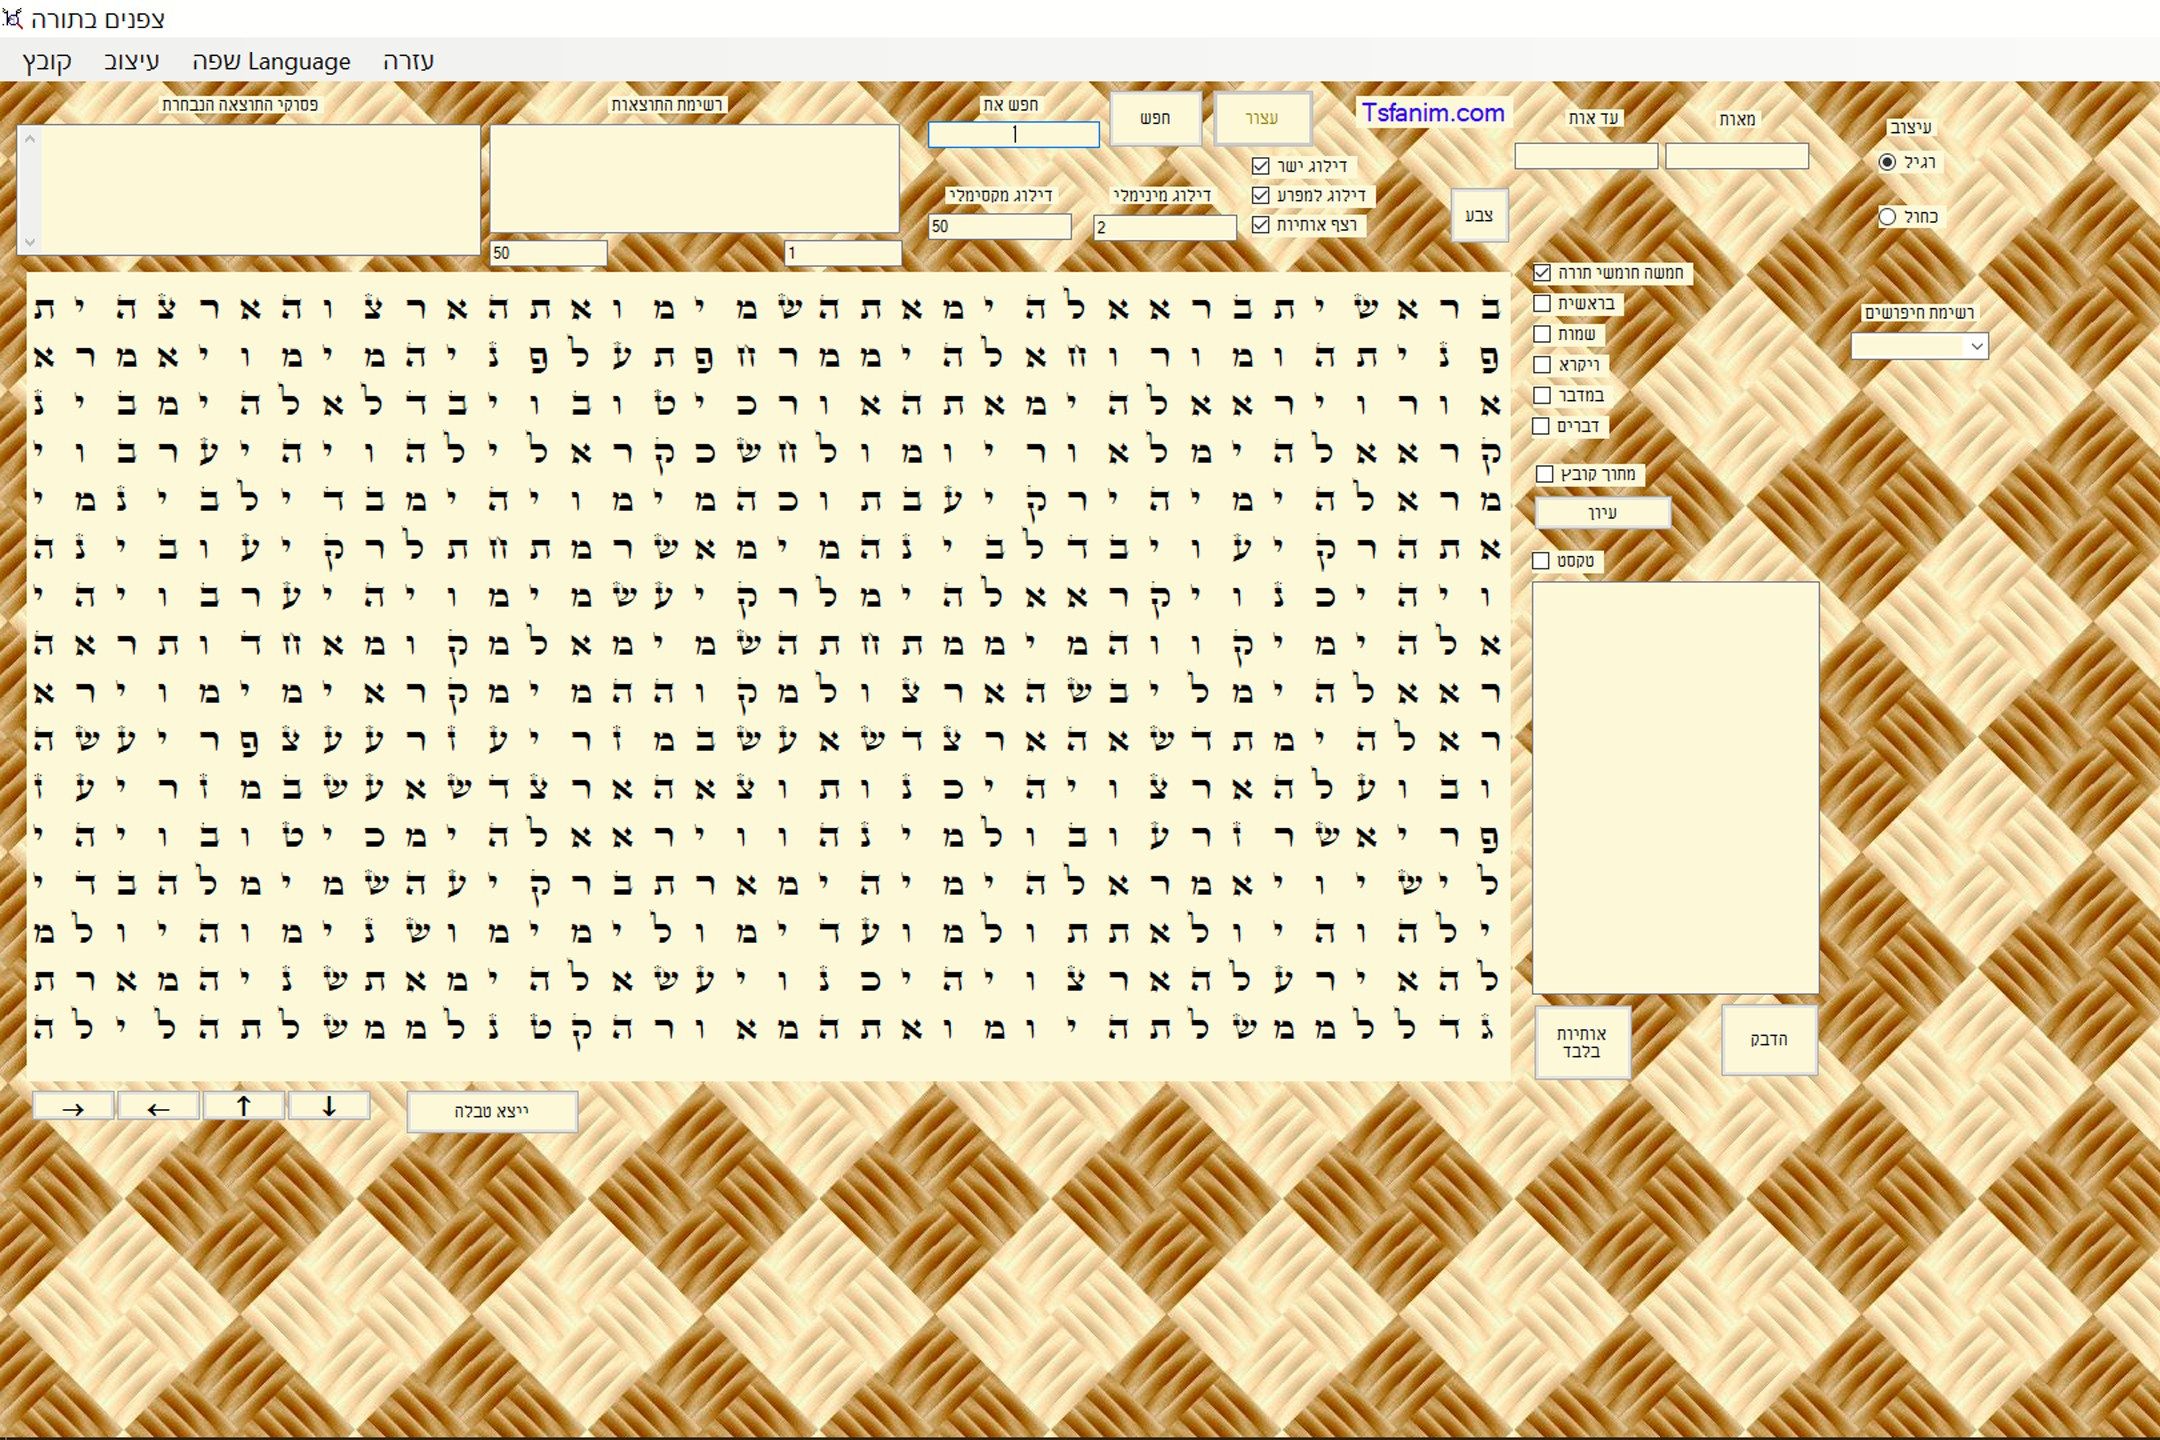 Ciphers in the Tora